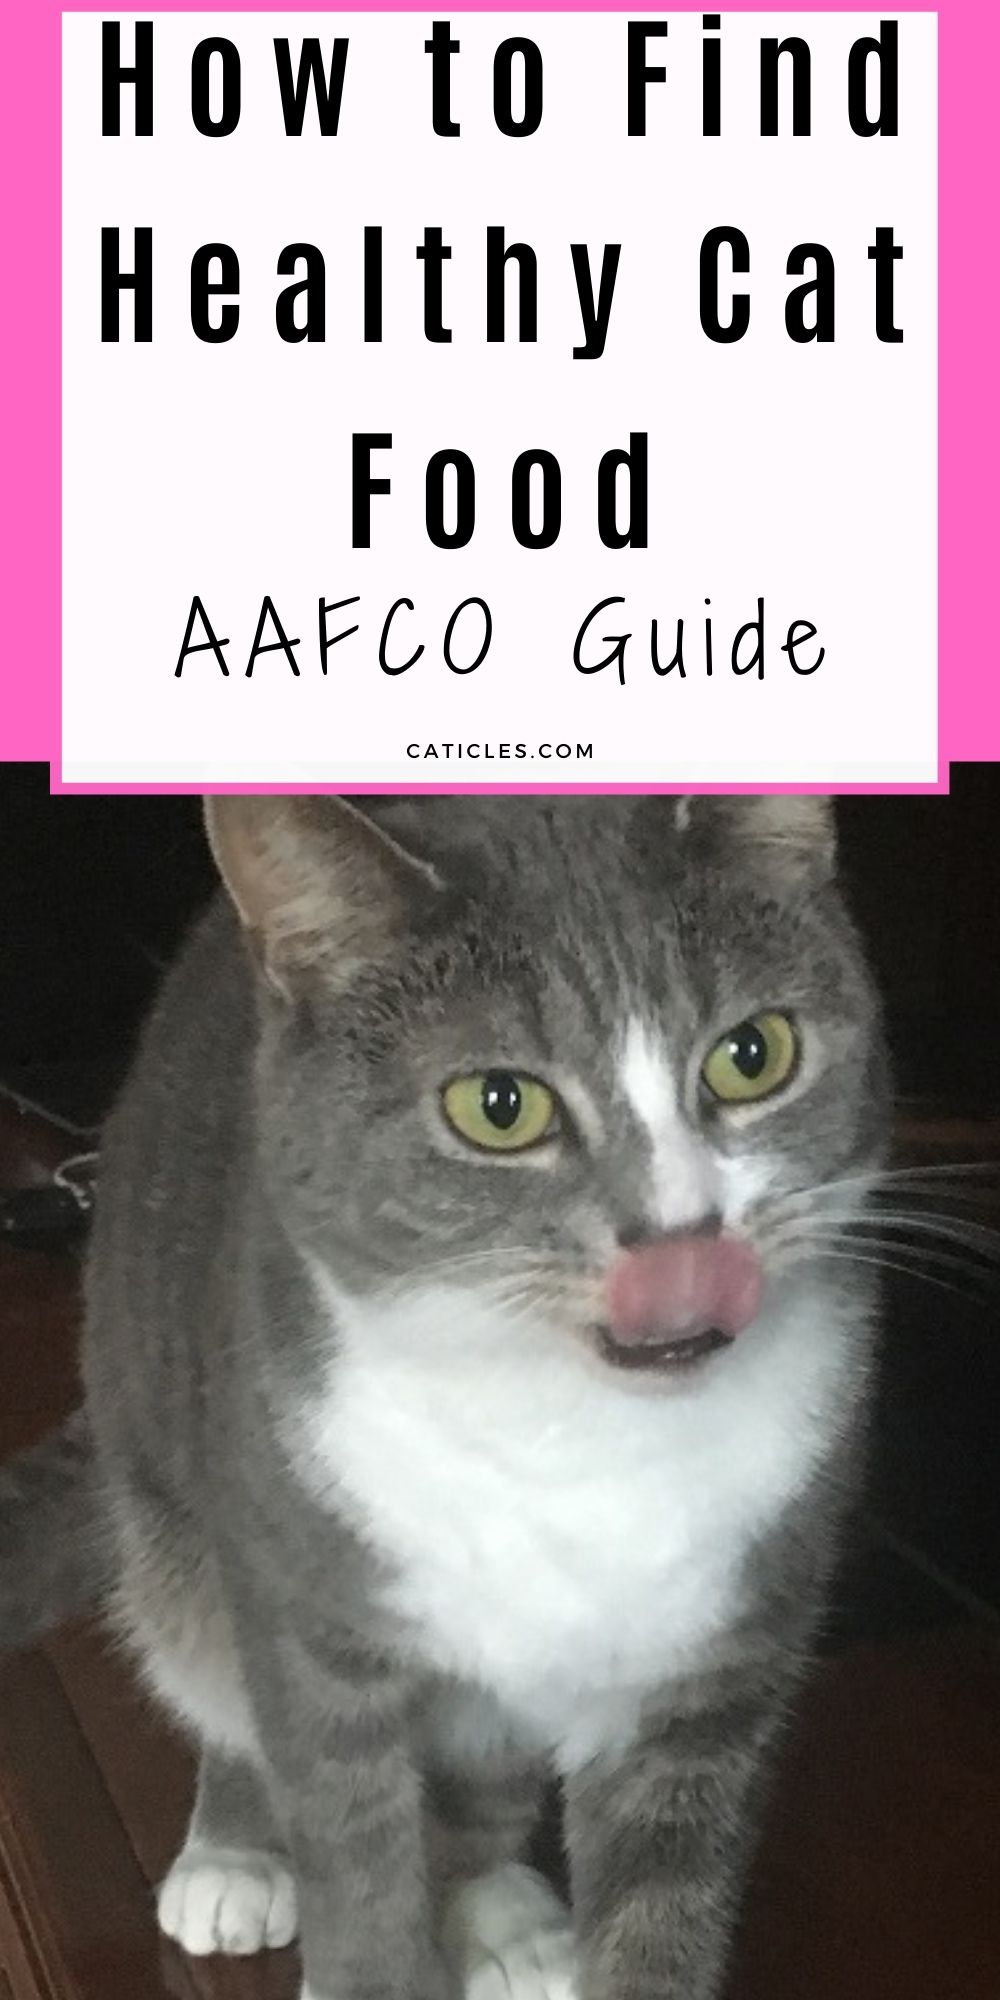 aafco approved cat food brands